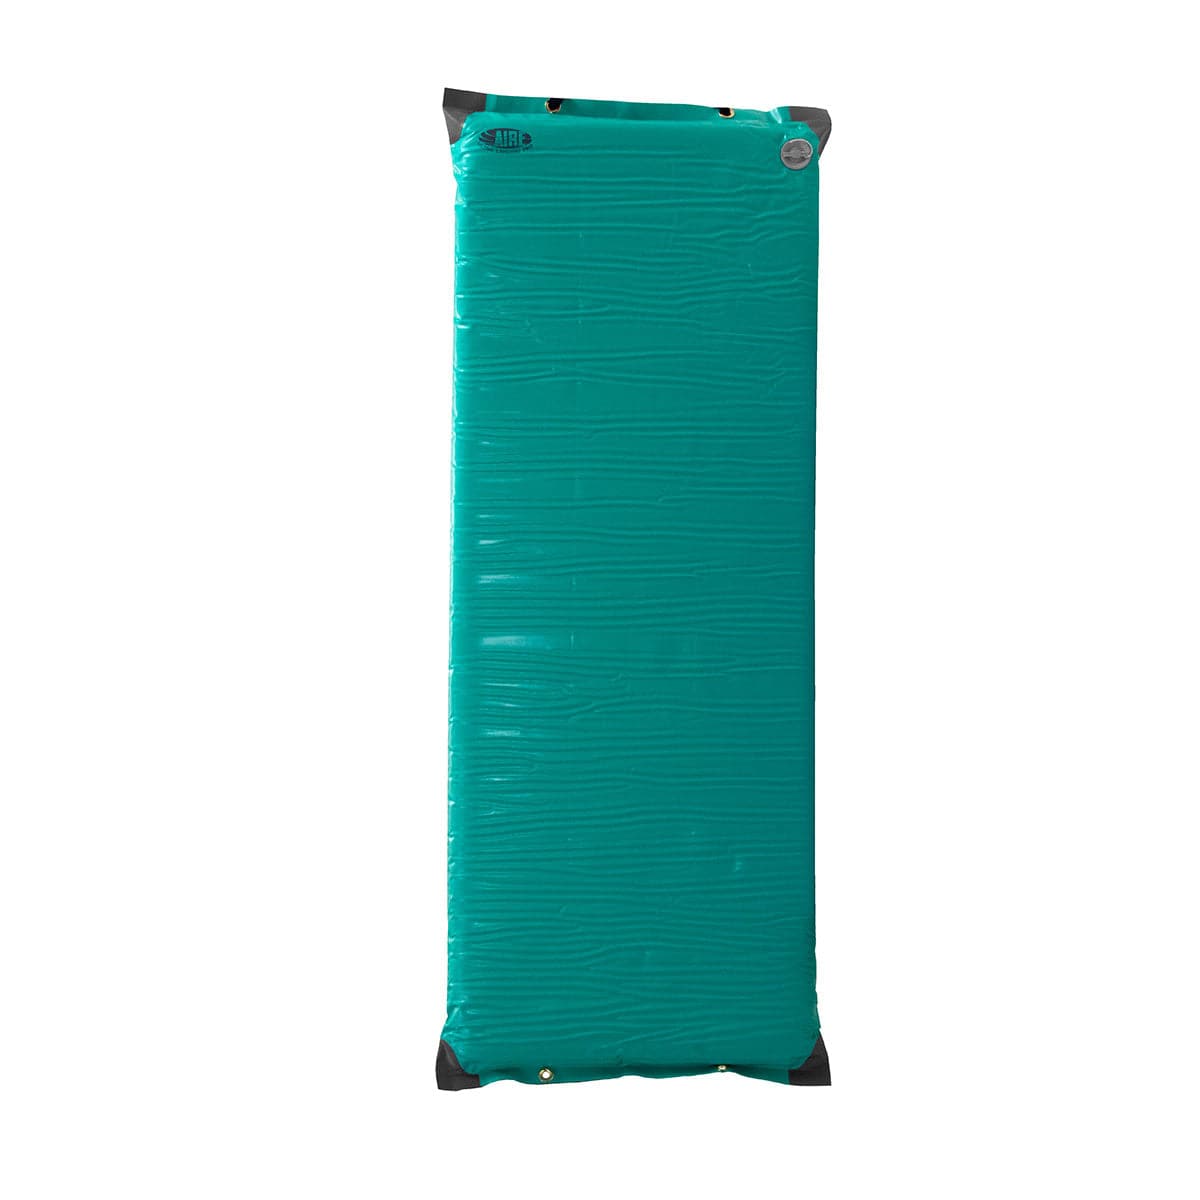 Featuring the Landing Pad Sleeping Pads paco pad, sleep pad manufactured by AIRE shown here from a sixth angle.